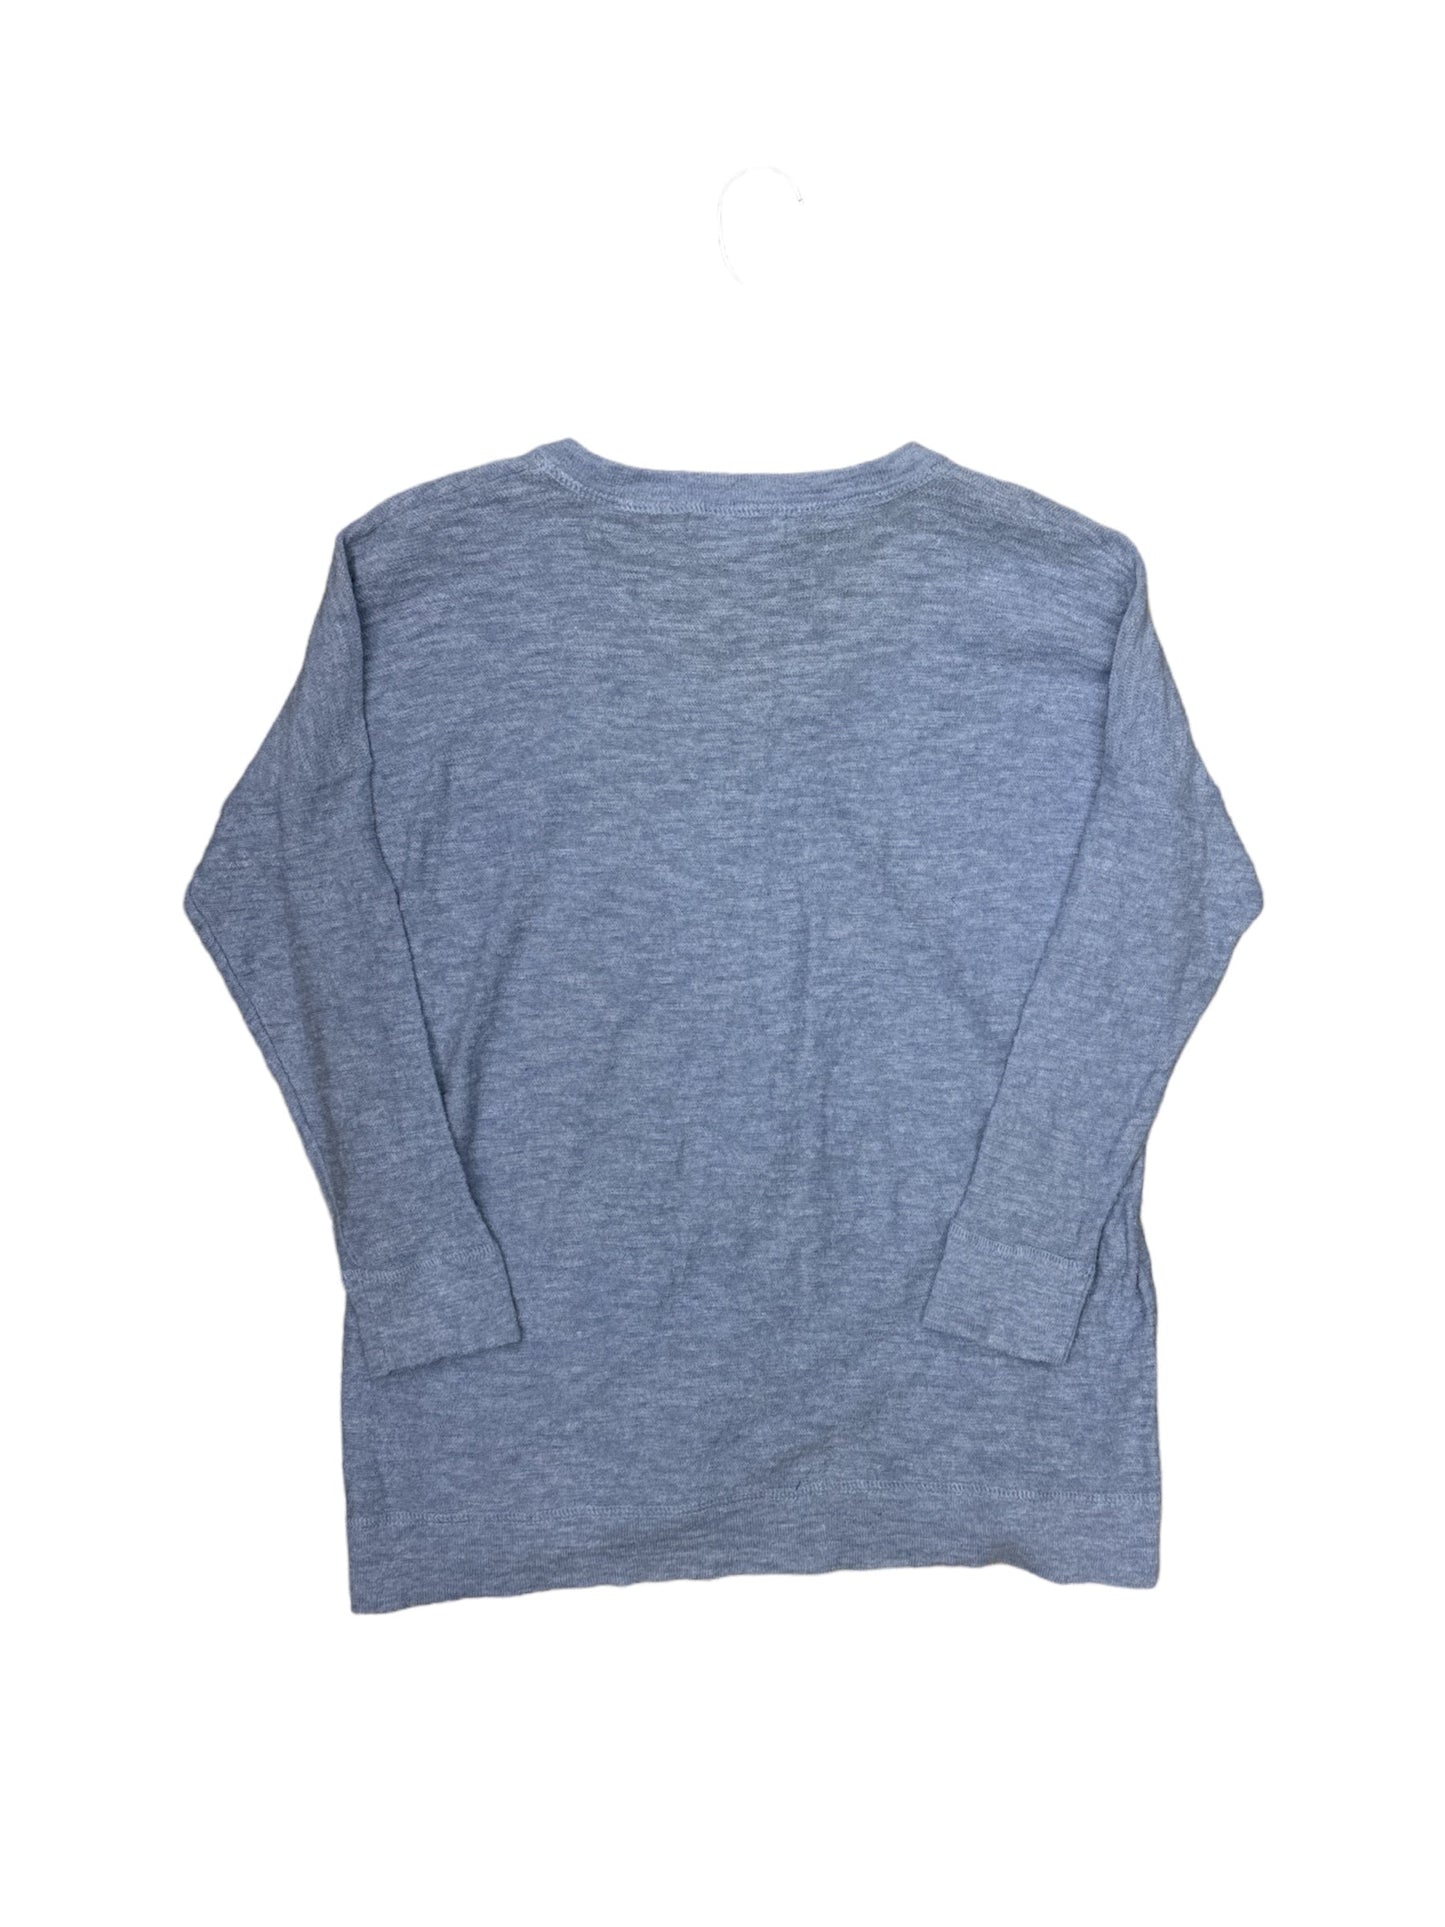 Blue Top Long Sleeve Madewell, Size Xs